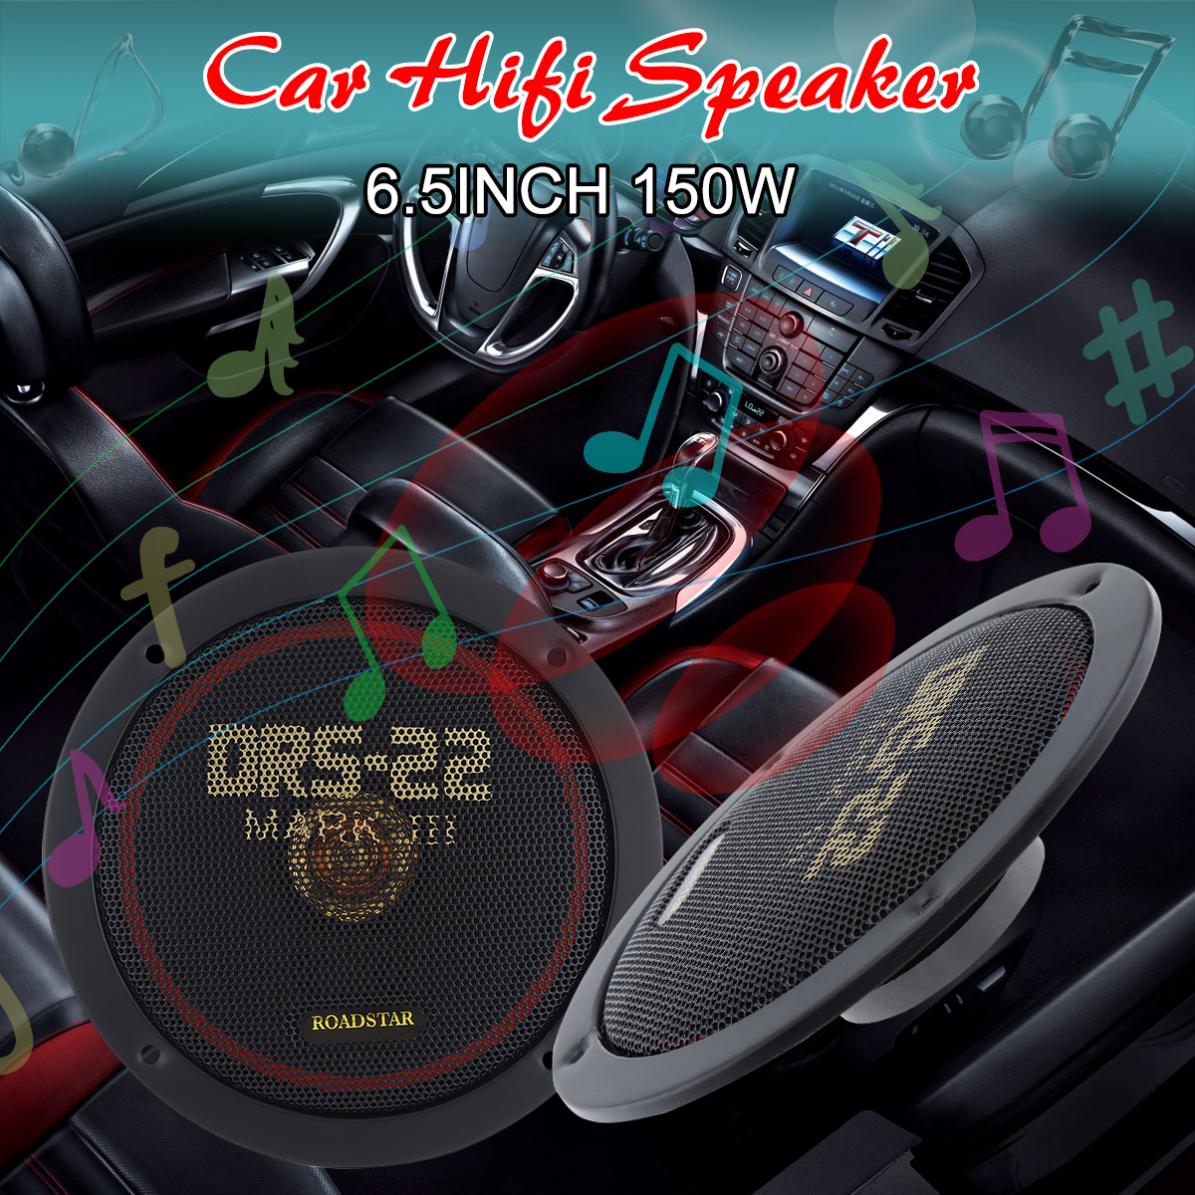 2pcs-65-Inch-150W-12V-Car-Cuctiveoaxial-Speaker-Vehicle-Door-Auto-Music-Stereo-Full-Range-Frequency--1788318-3